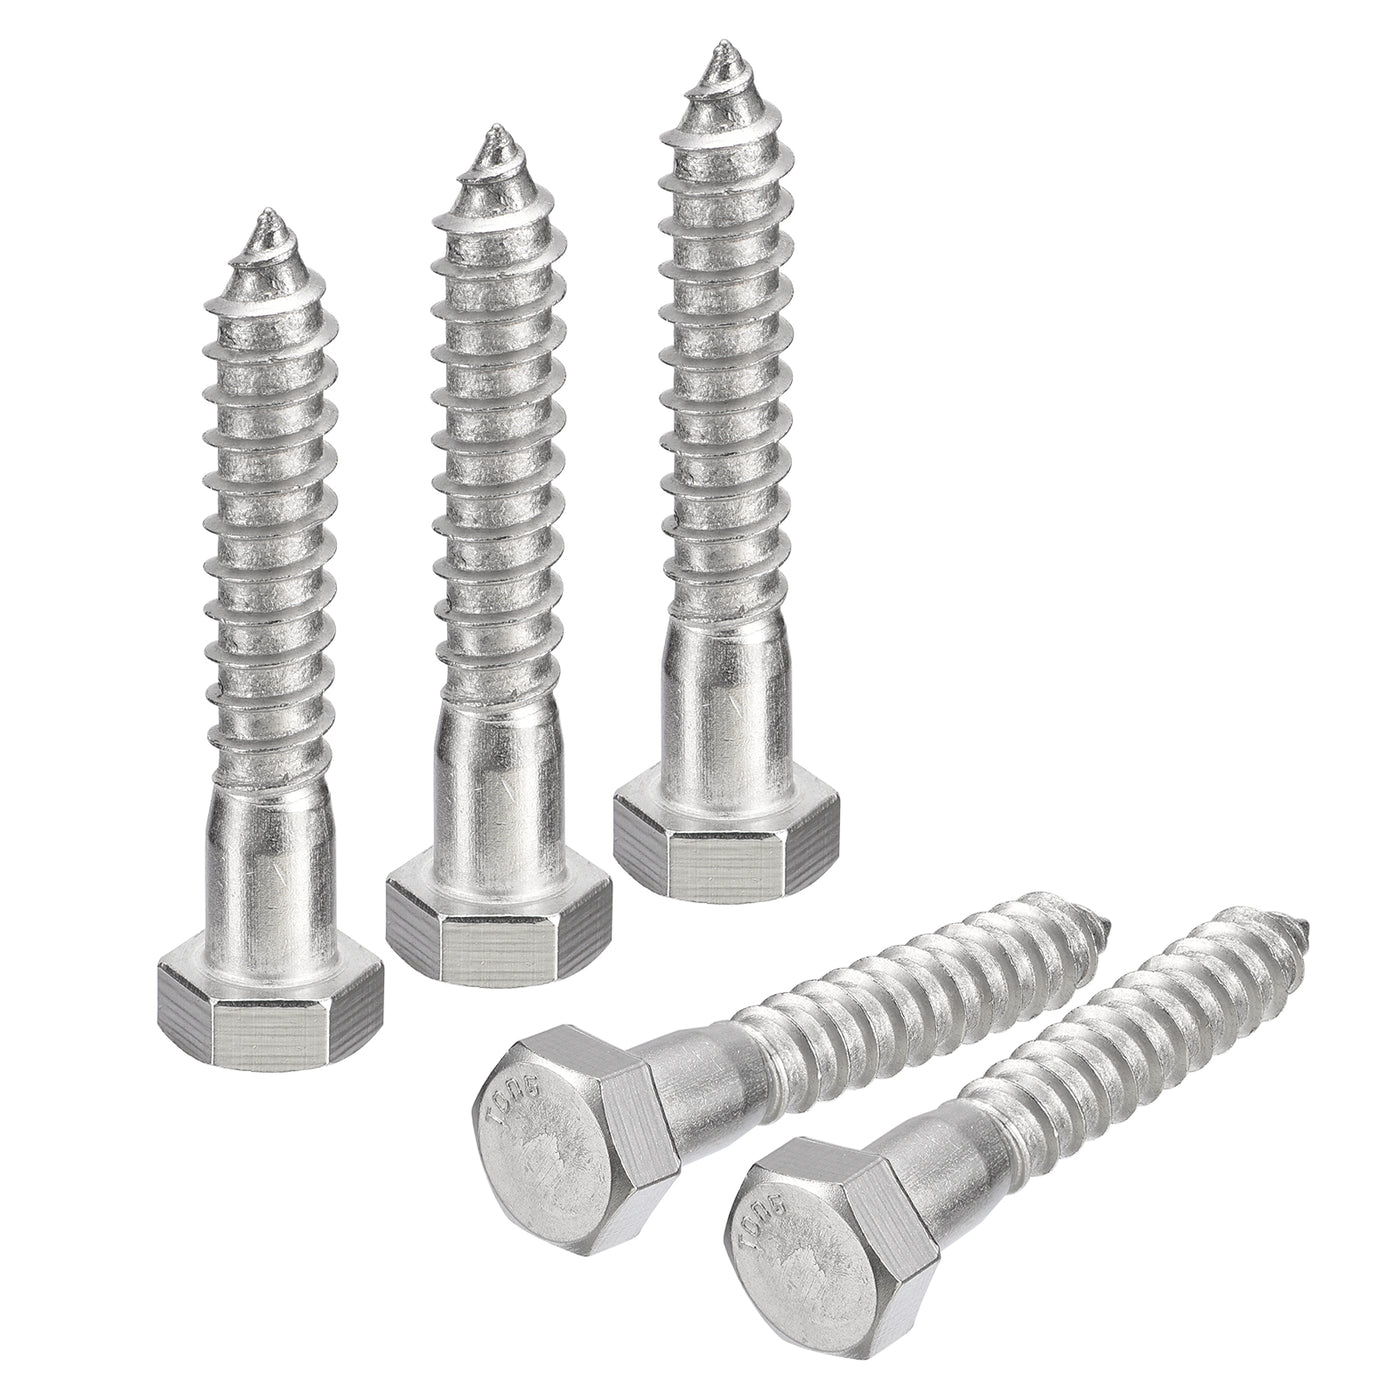 uxcell Uxcell Hex Head Lag Screws Bolts, 10pcs 1/2" x 3" 304 Stainless Steel Wood Screws